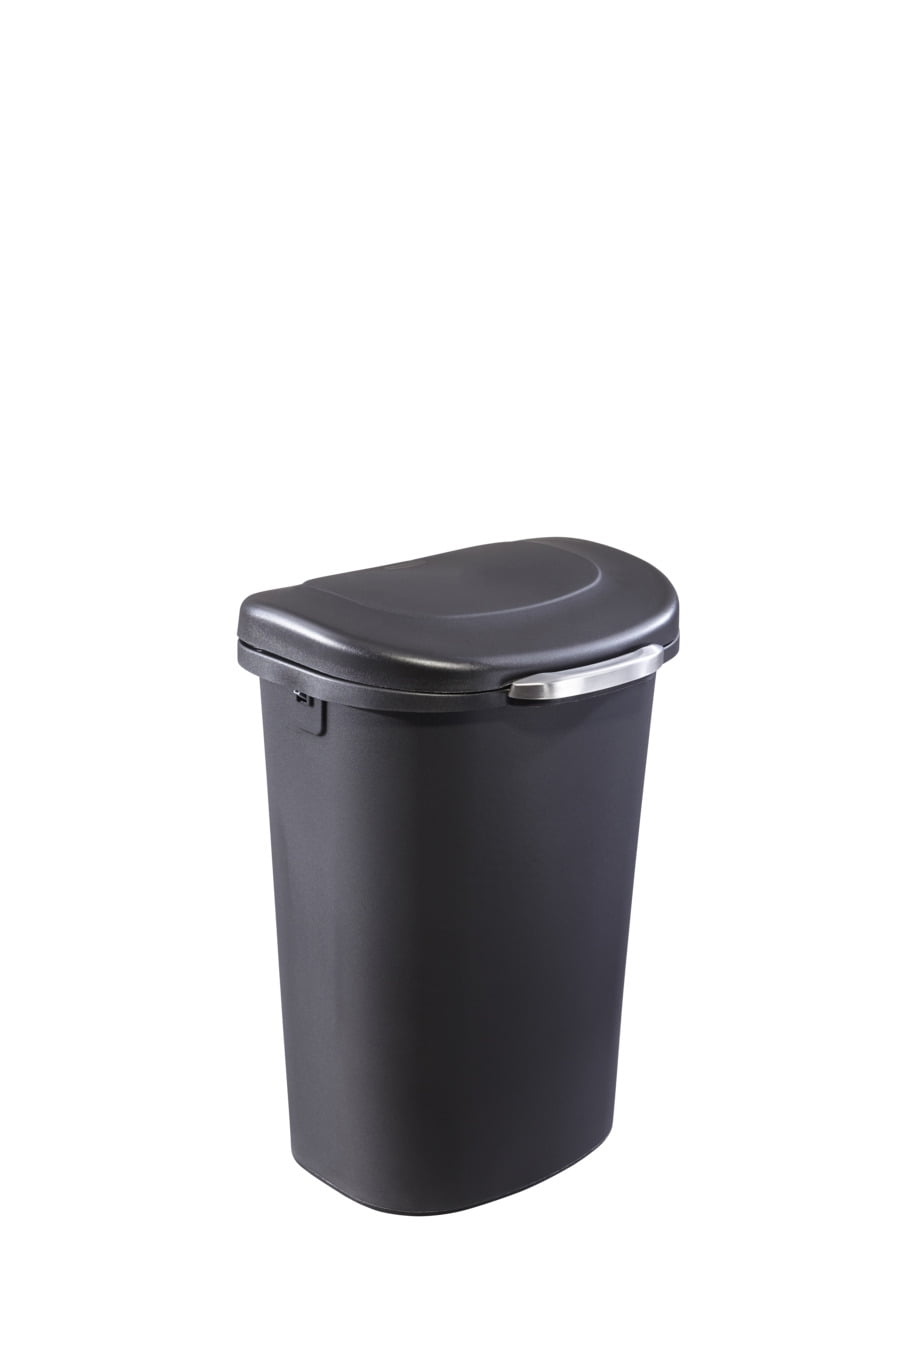  Rubbermaid Spring Top Kitchen Bathroom Trash Can with Lid, 13  Gallon Gray Plastic Garbage Bin, 49.2-liter : Everything Else